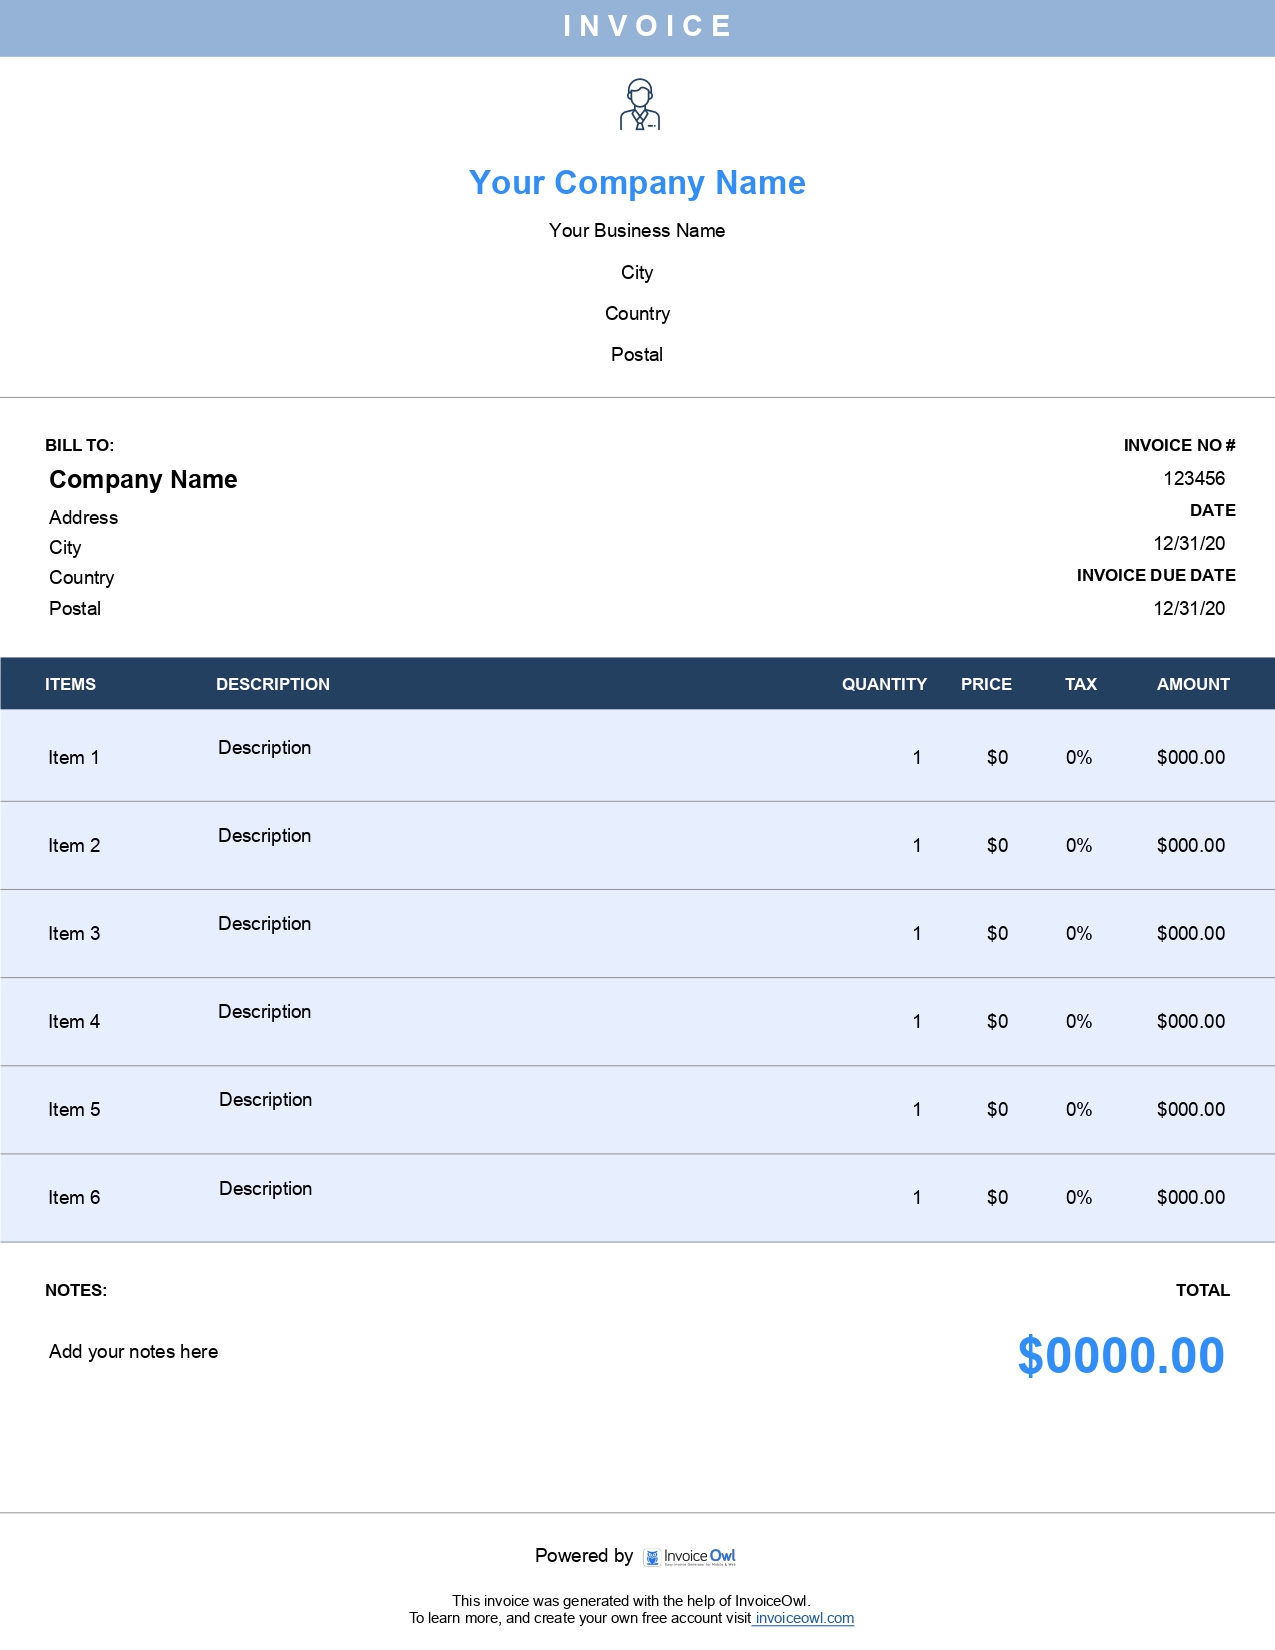 Multiple orders invoice template